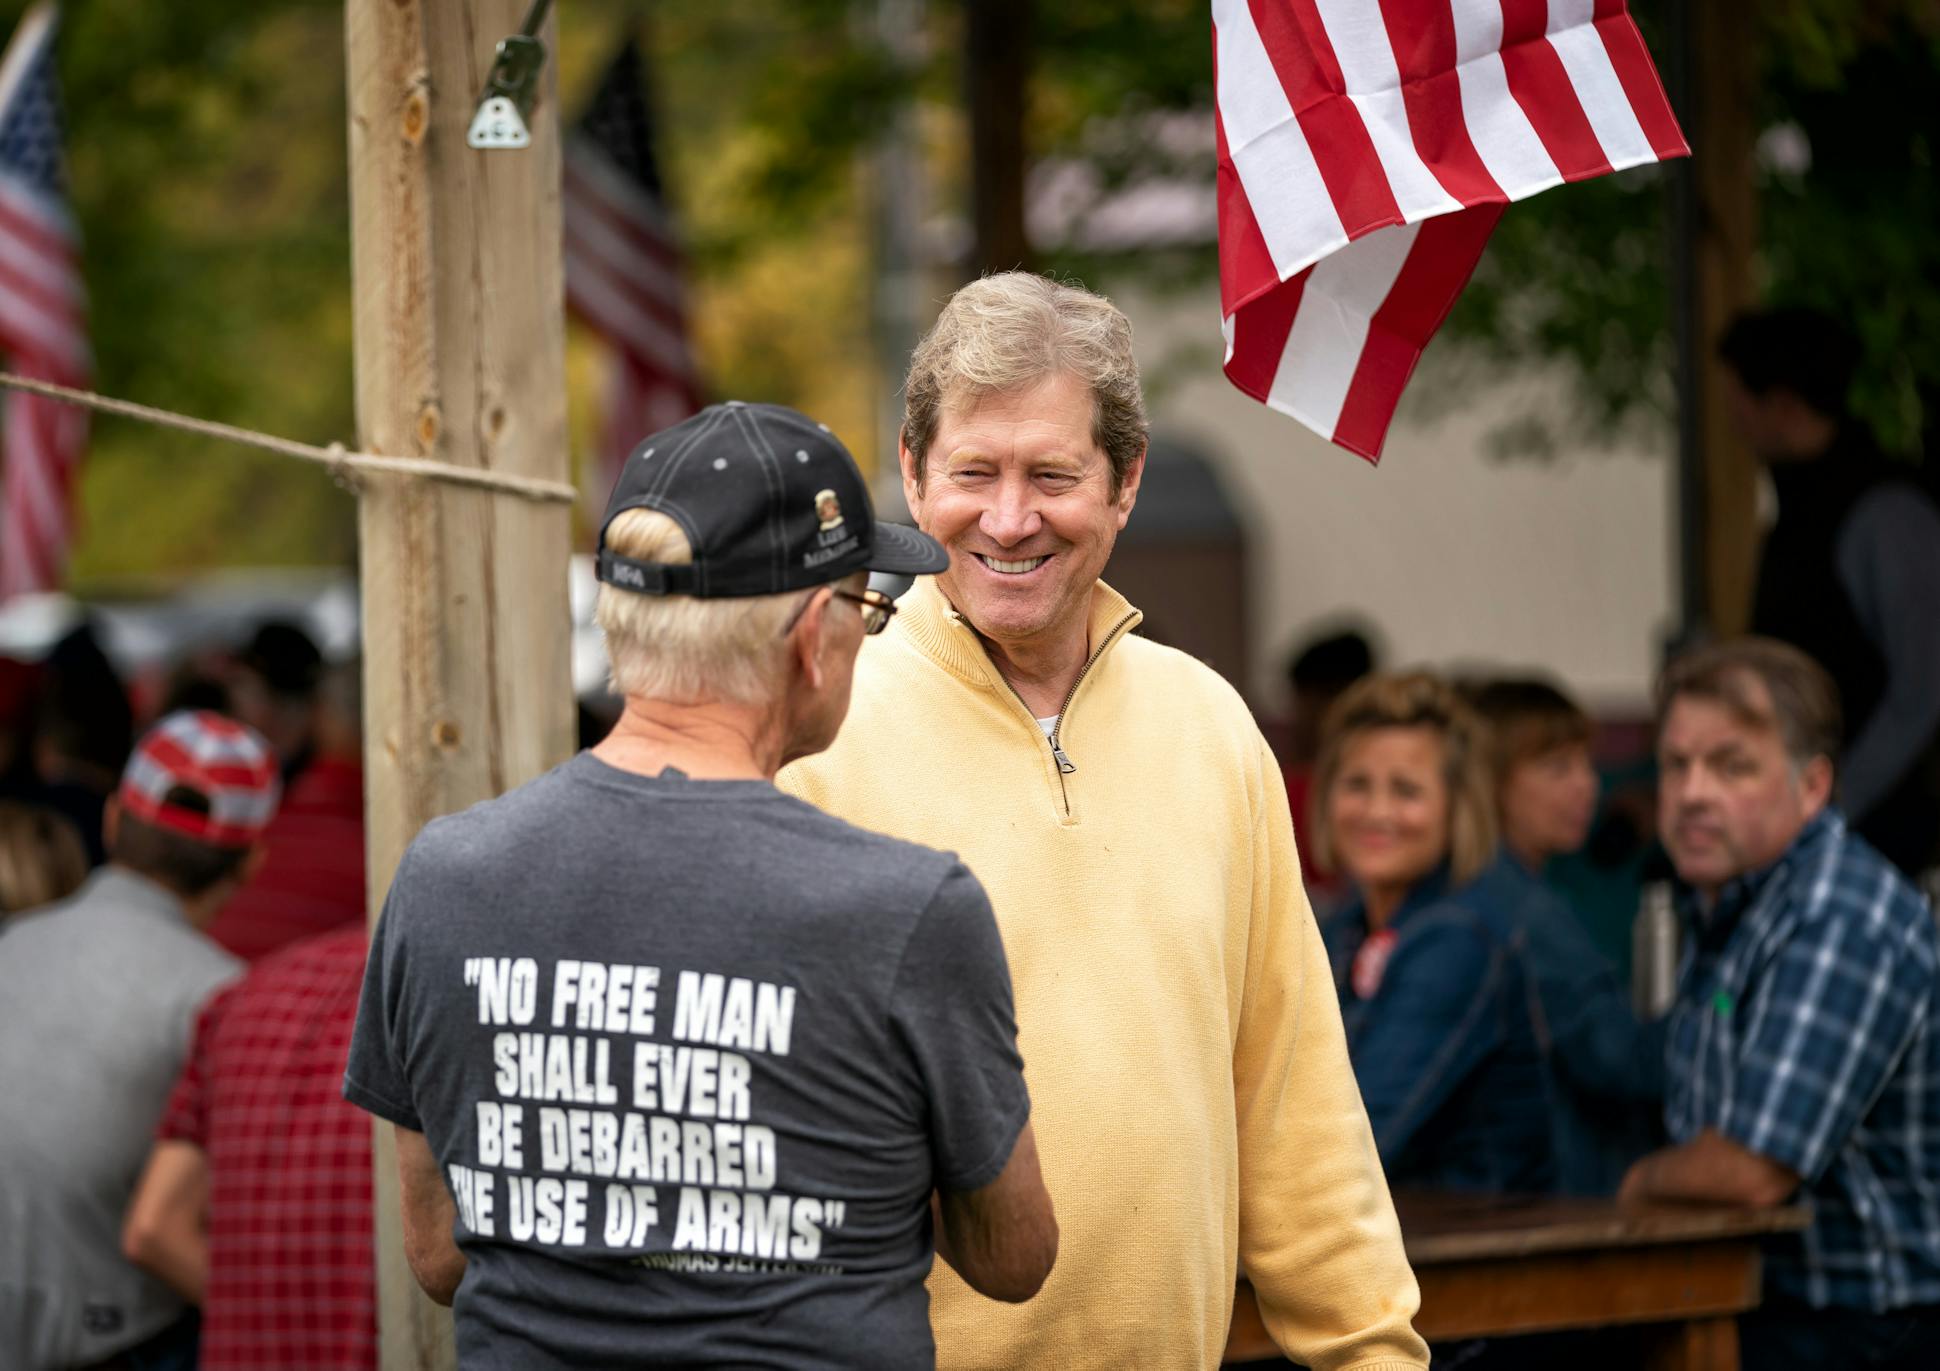 Jason Lewis spoke to the crowd at Reagan Day at the Ranch, a Republican event held annually in Taylors Falls.